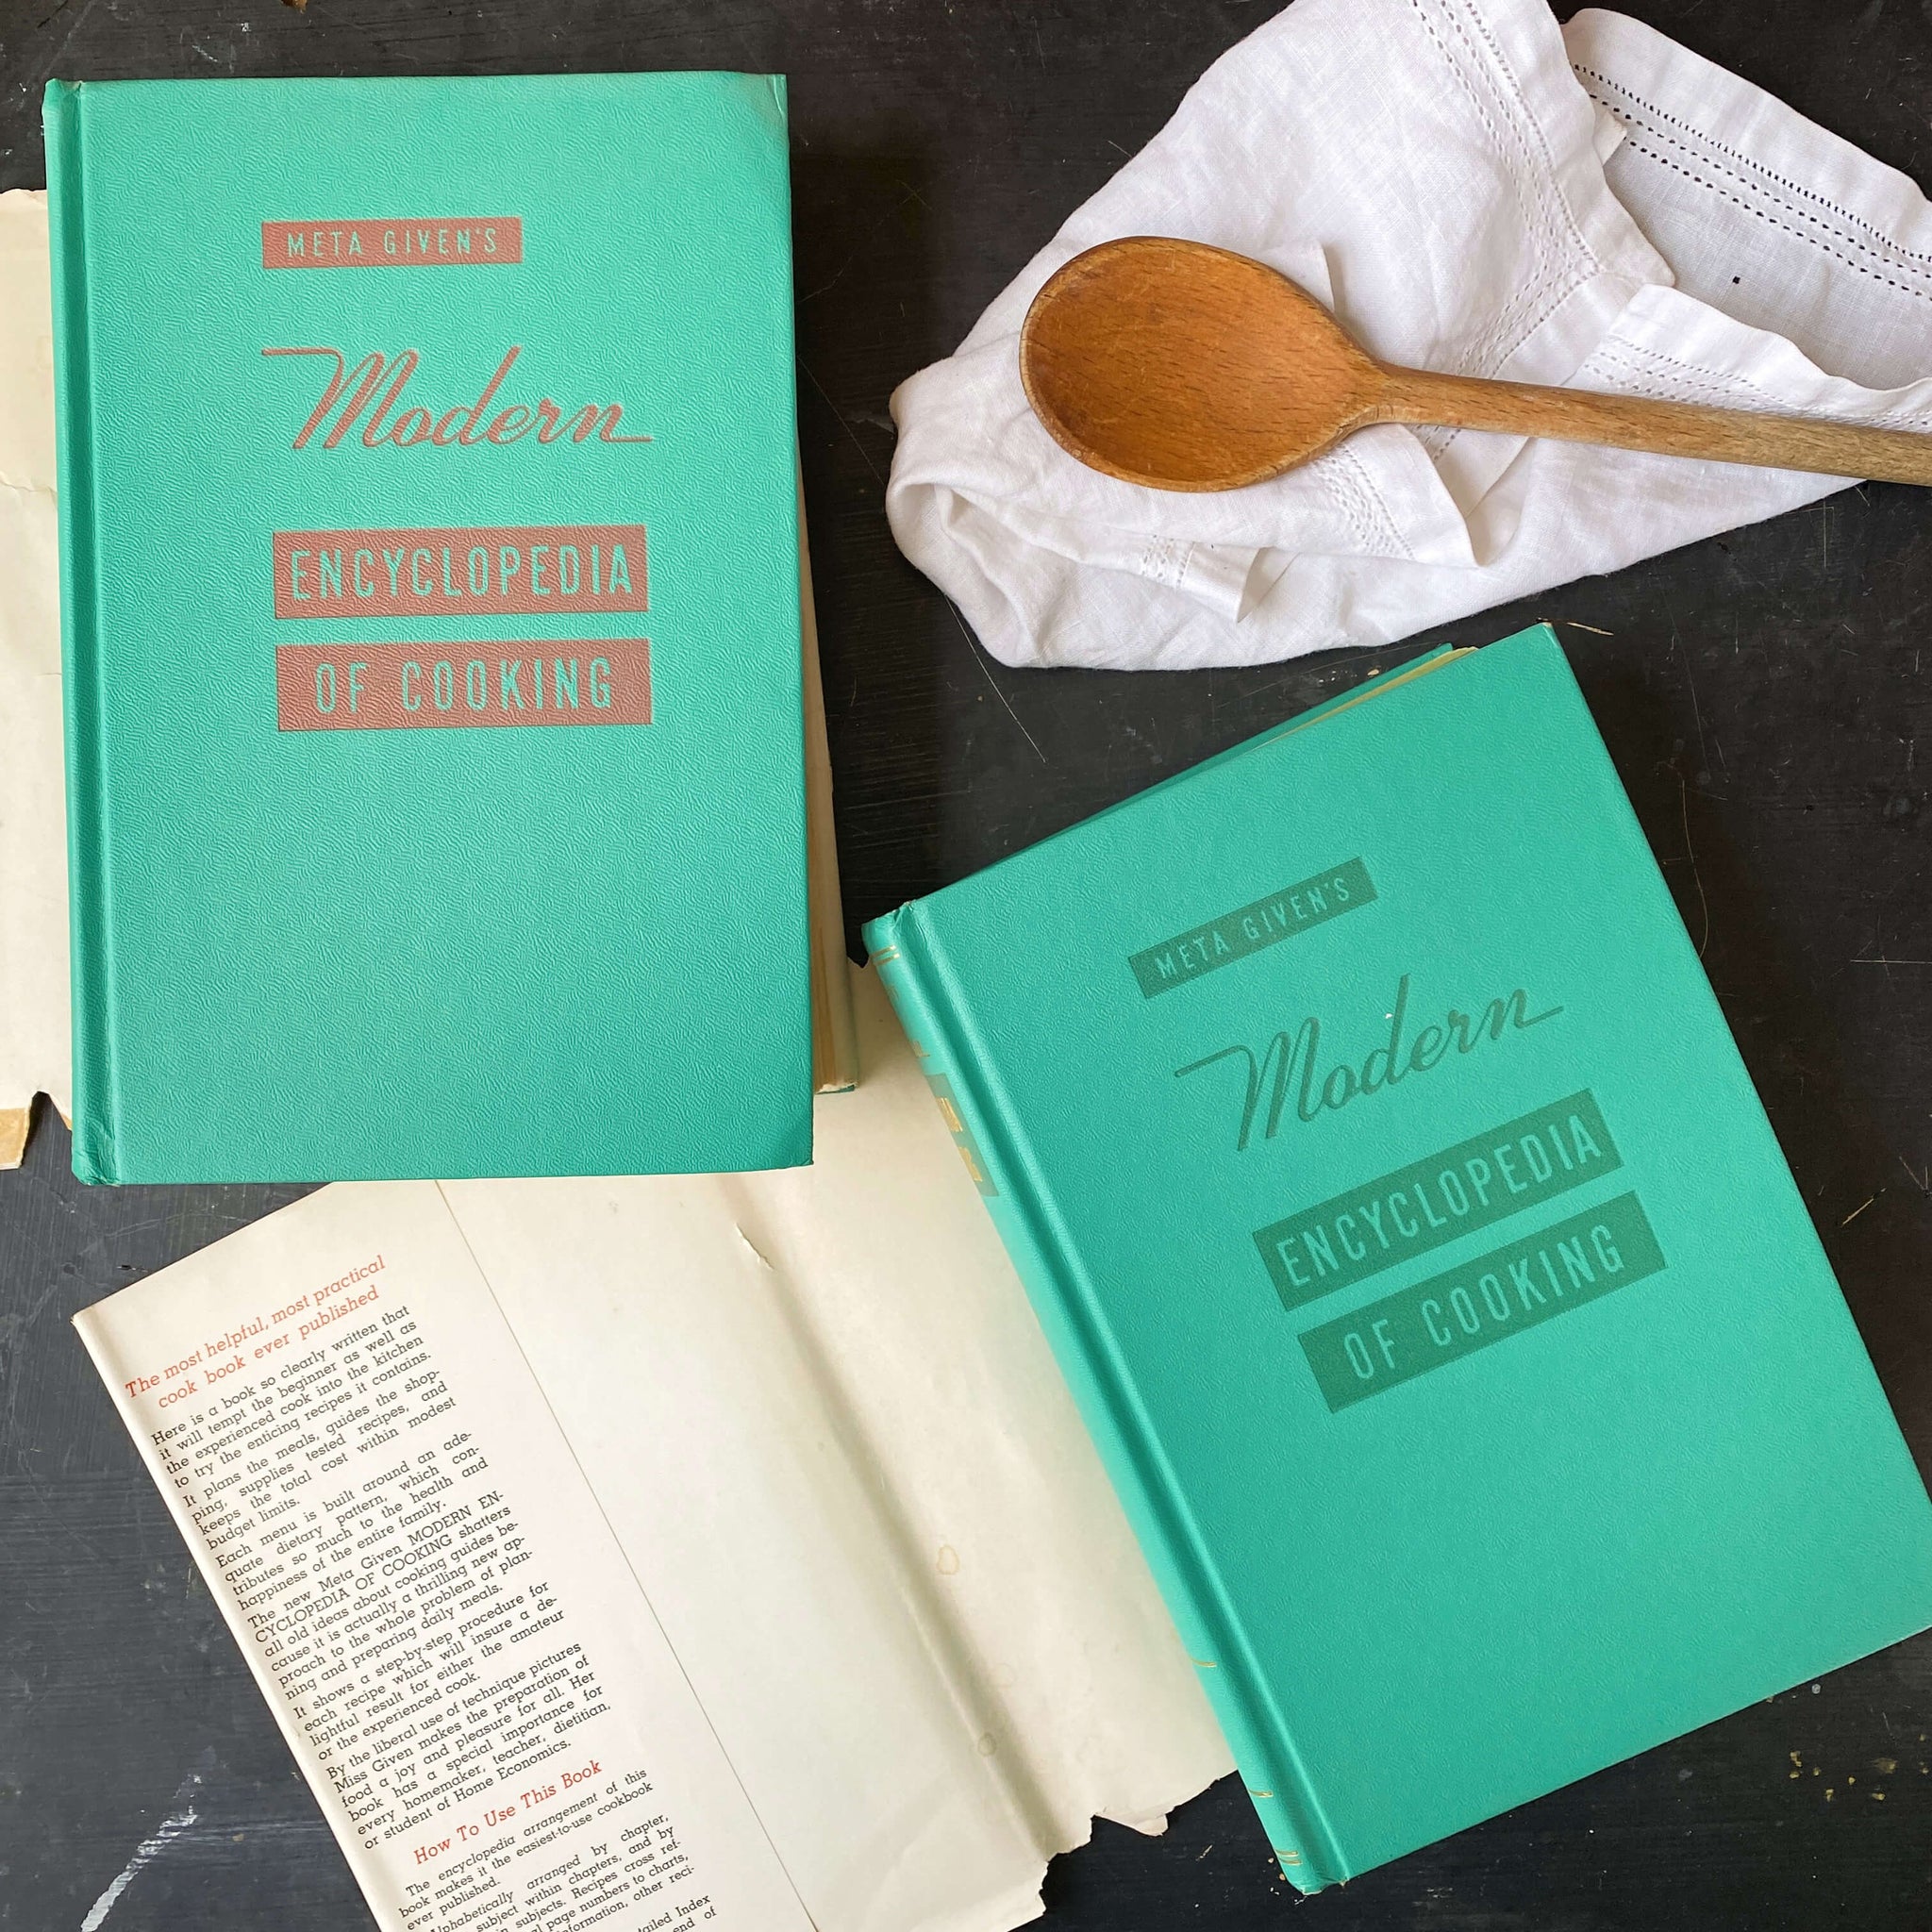 Meta Given's Modern Encyclopedia of Cooking - 1959 Edition - Two Volume Set - Book Club Edition